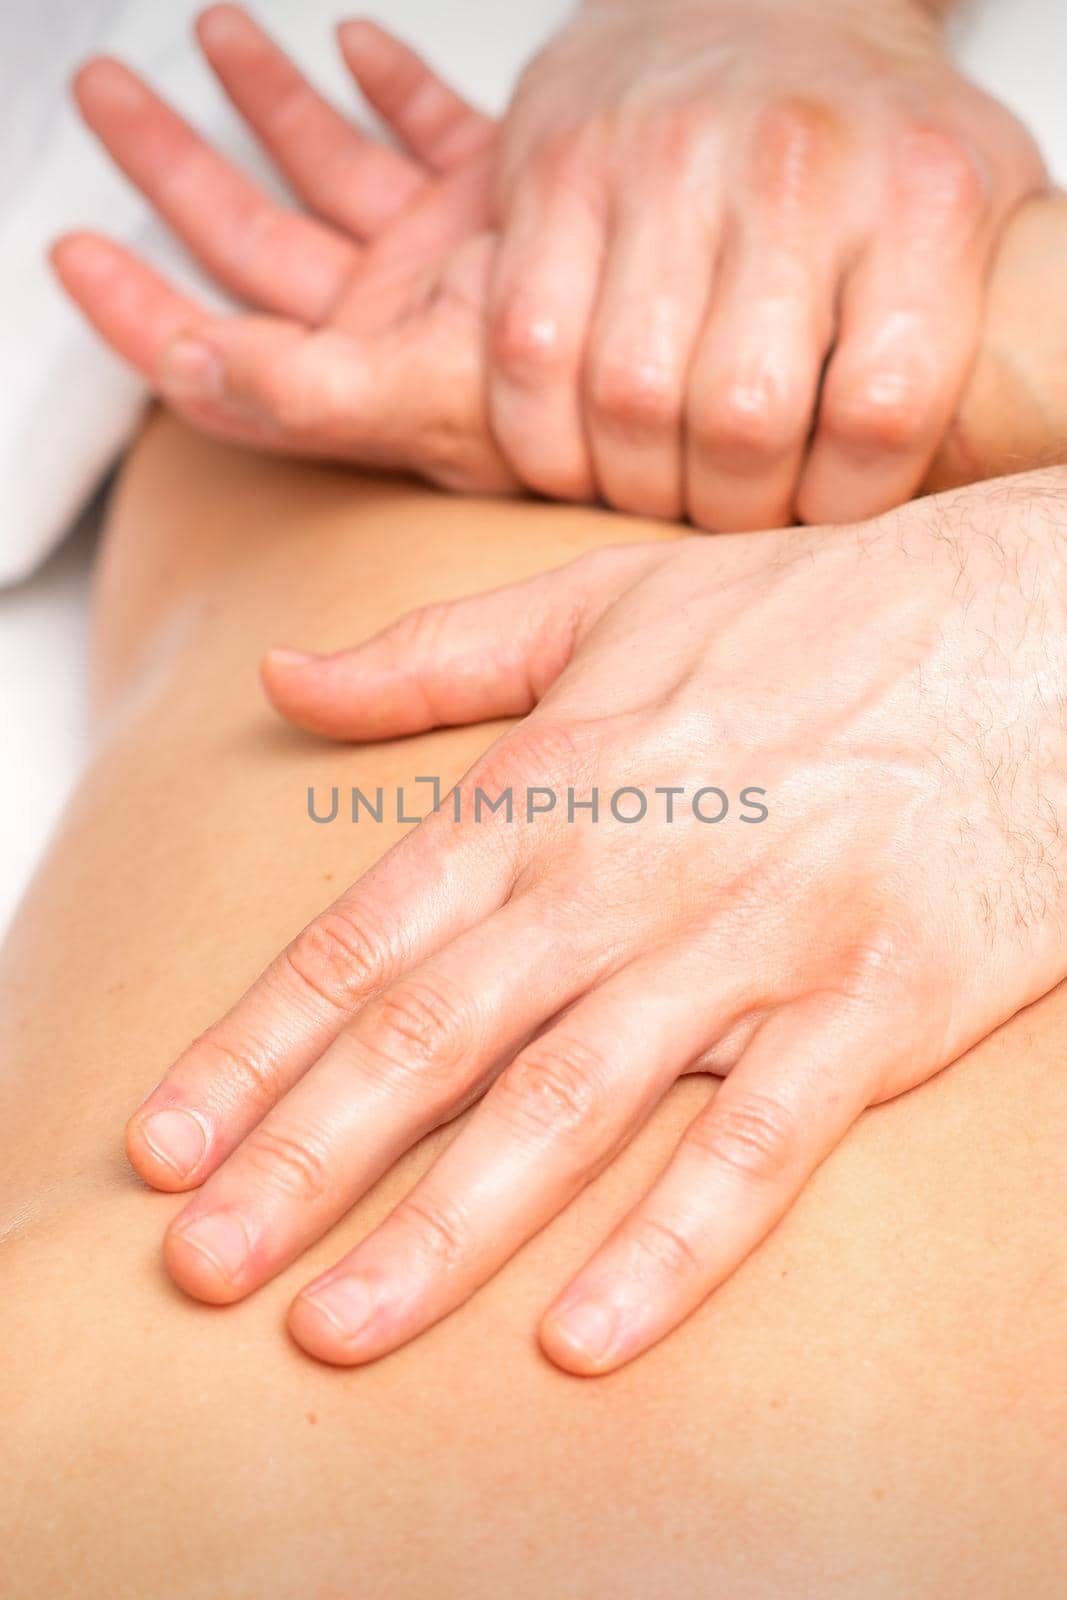 A male physiotherapist stretches the arms on the back of a man lying down, close up. by okskukuruza